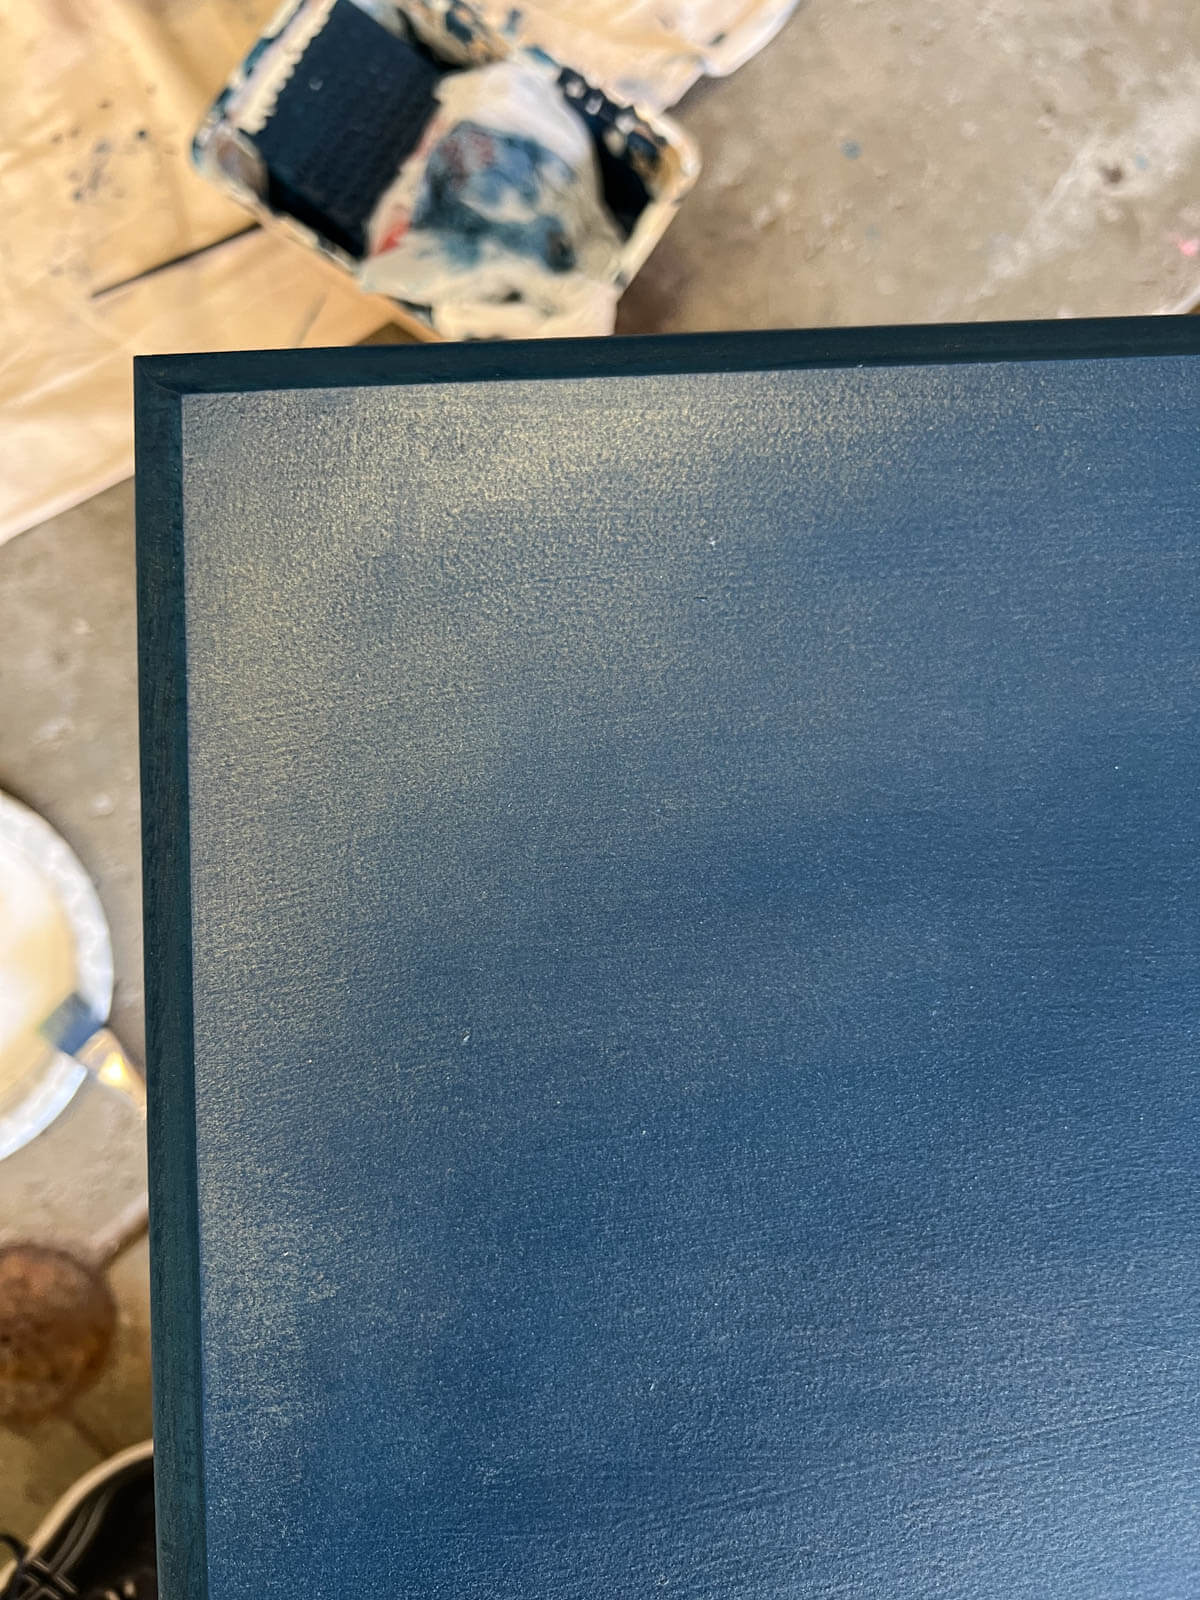 shiny blue layer on top of paint on desk door.